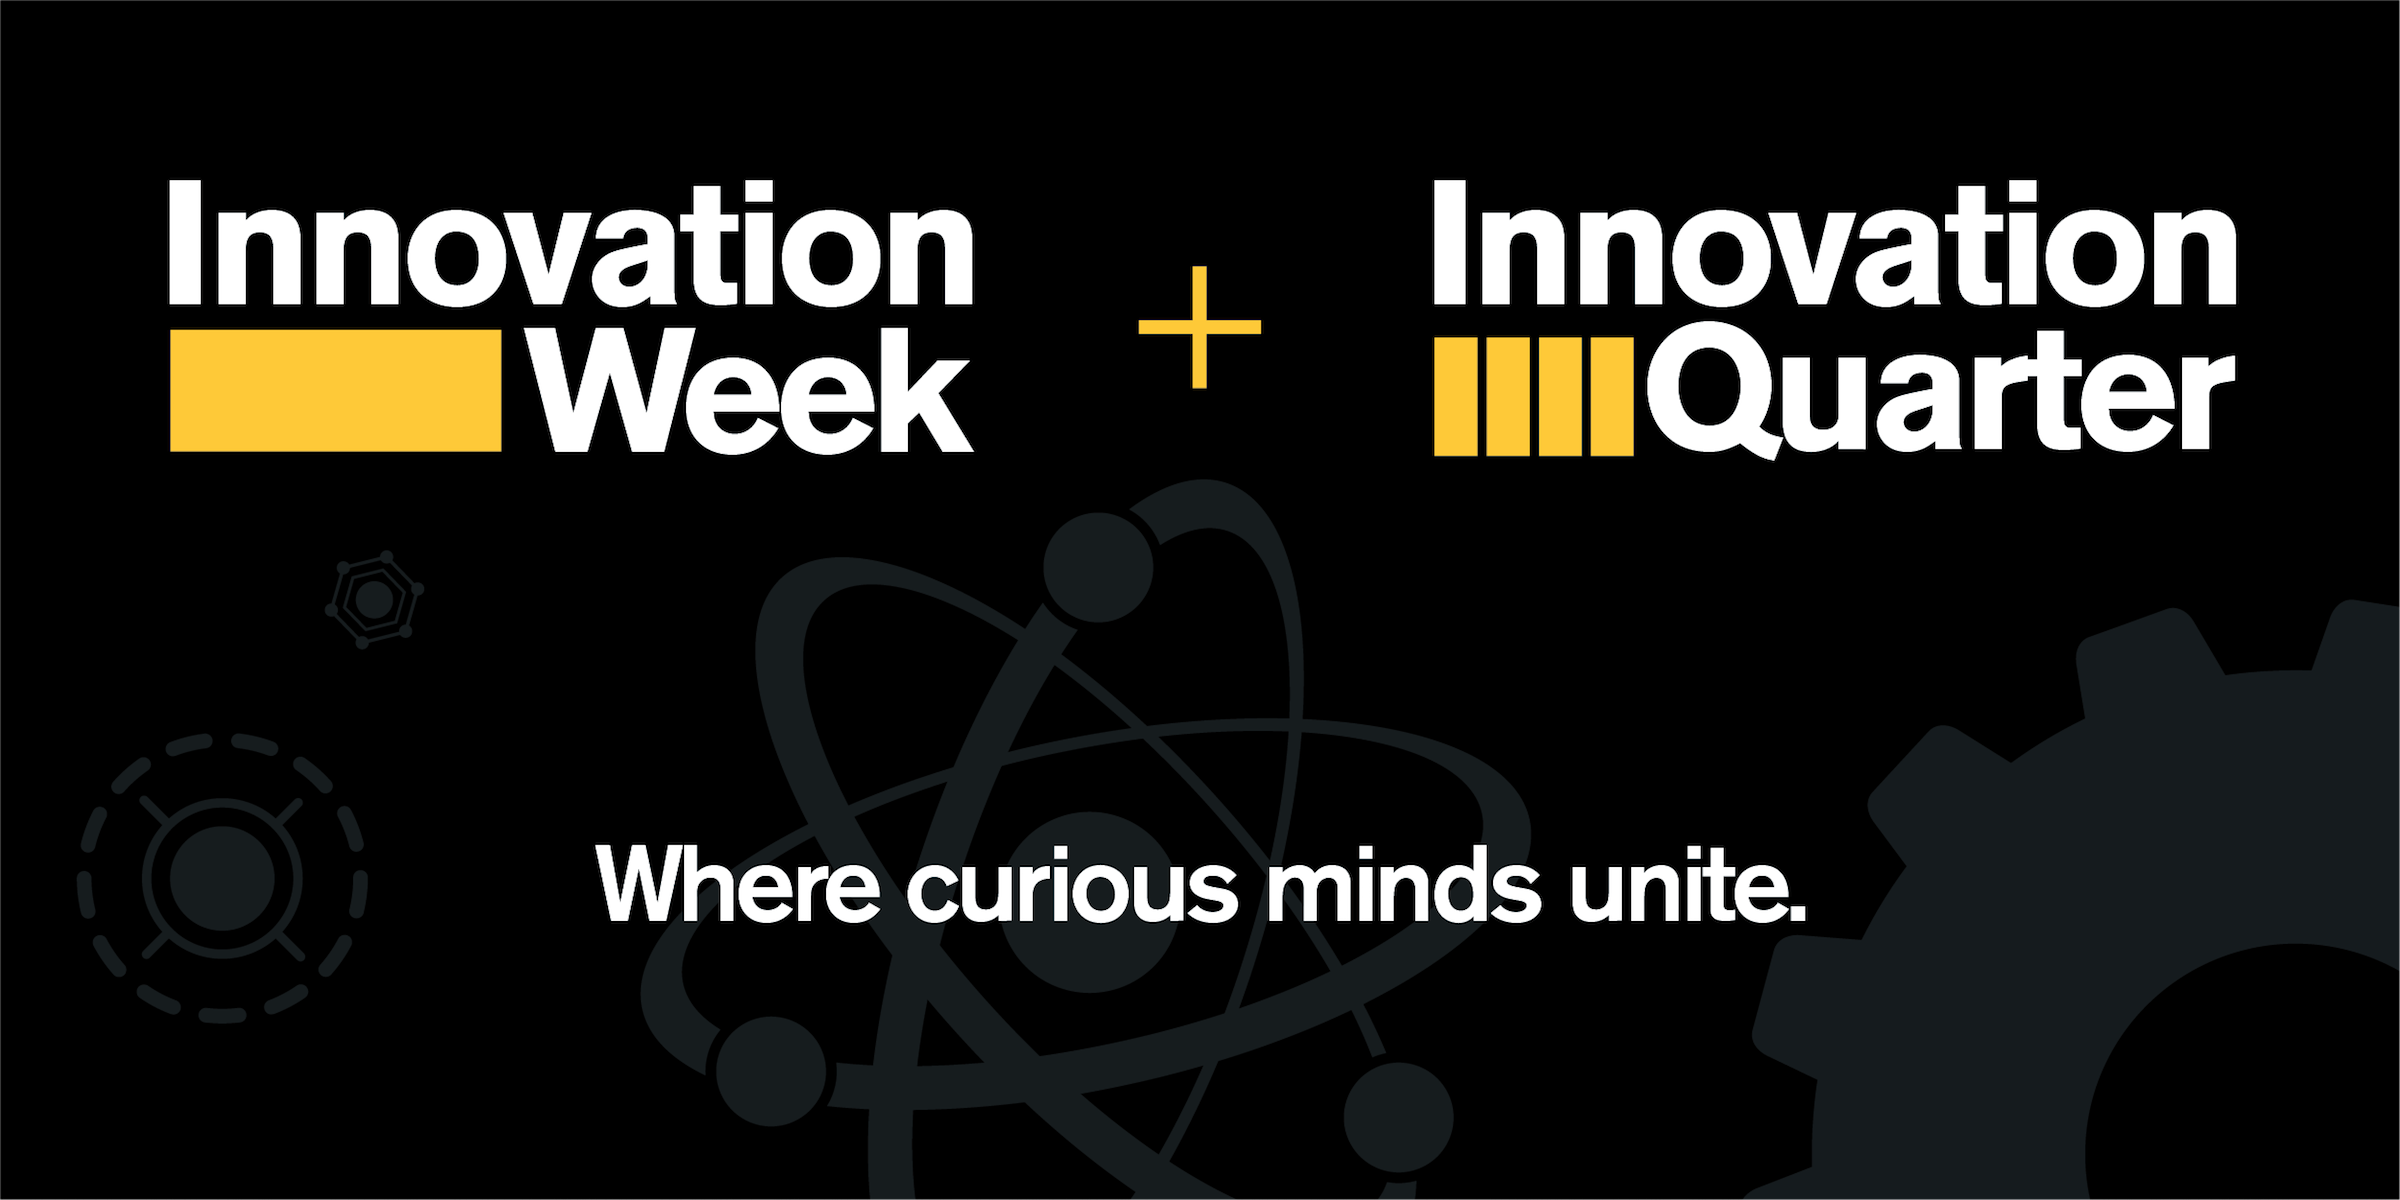 Graphic depicting "Innovation Week," "Innovation Quarter" and "Where curious minds unite."